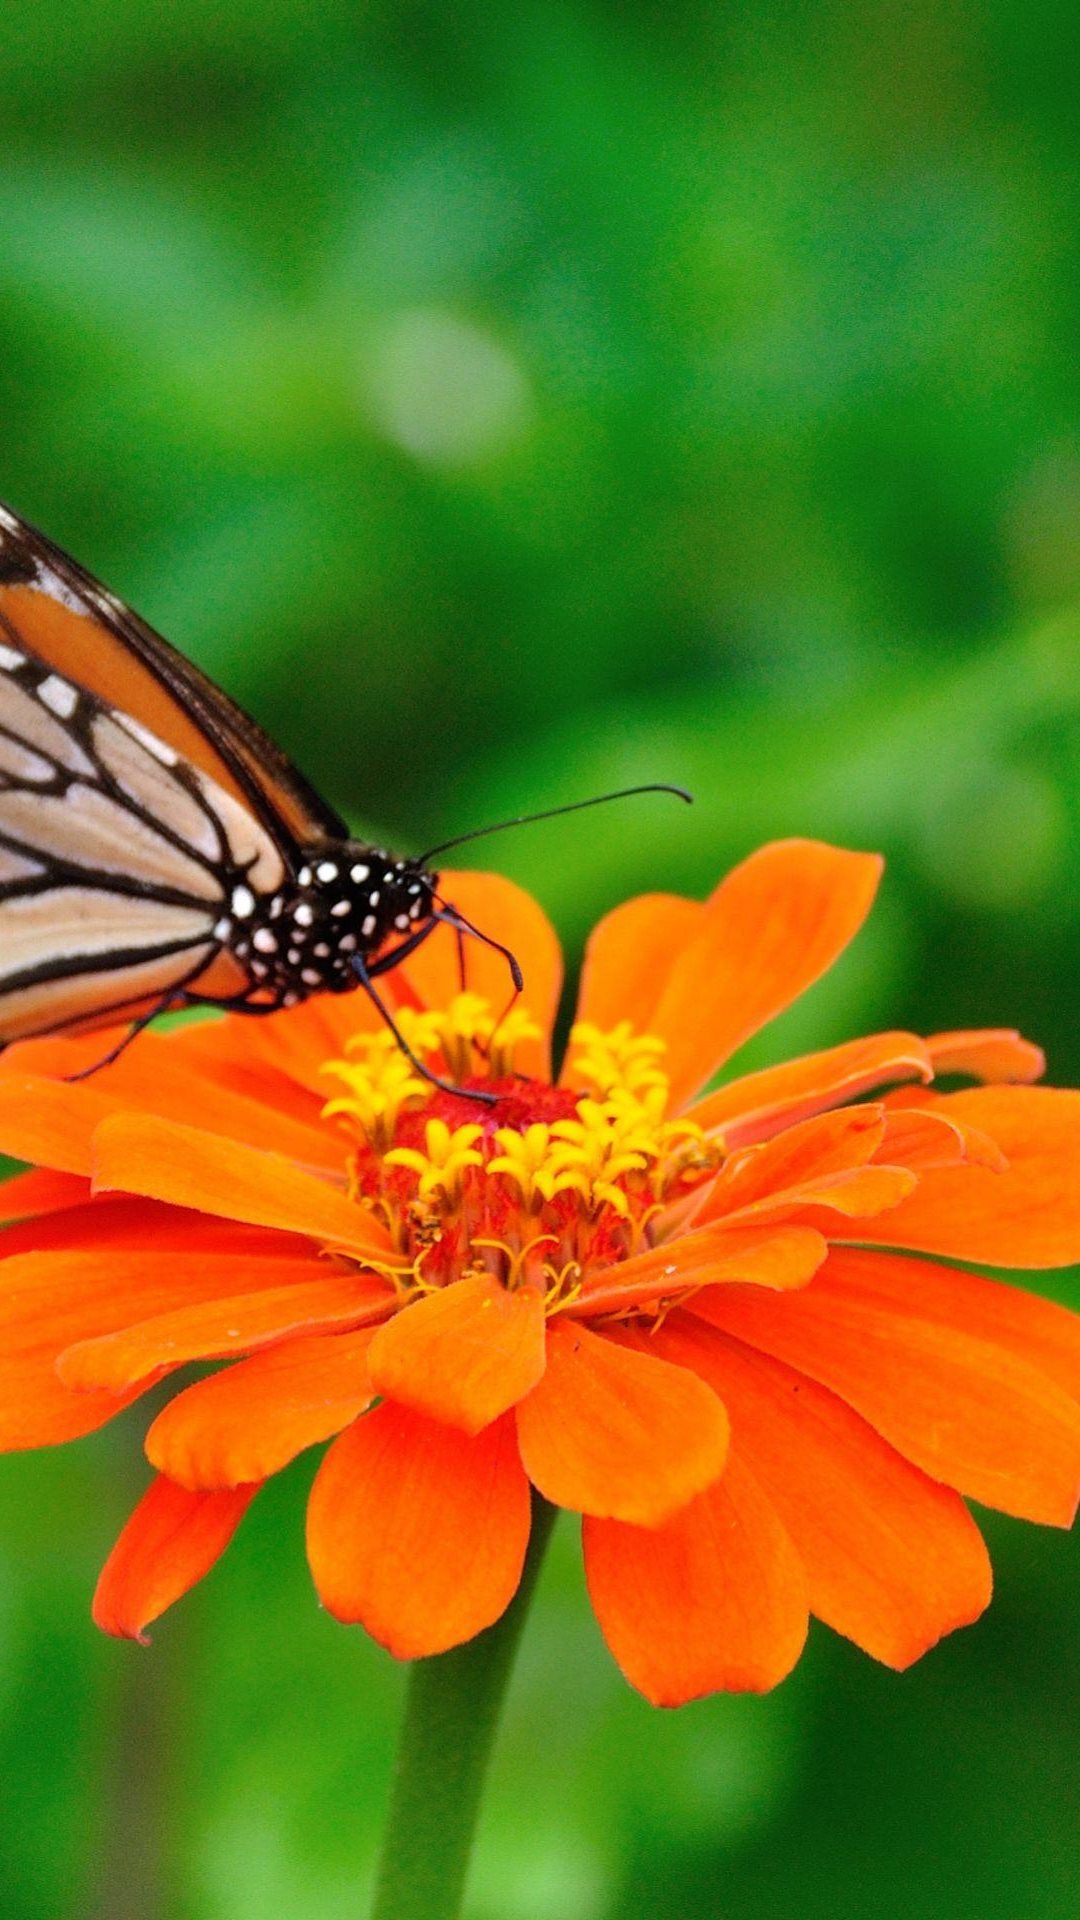 Orange Butterfly On Flower Android Wallpaper free download